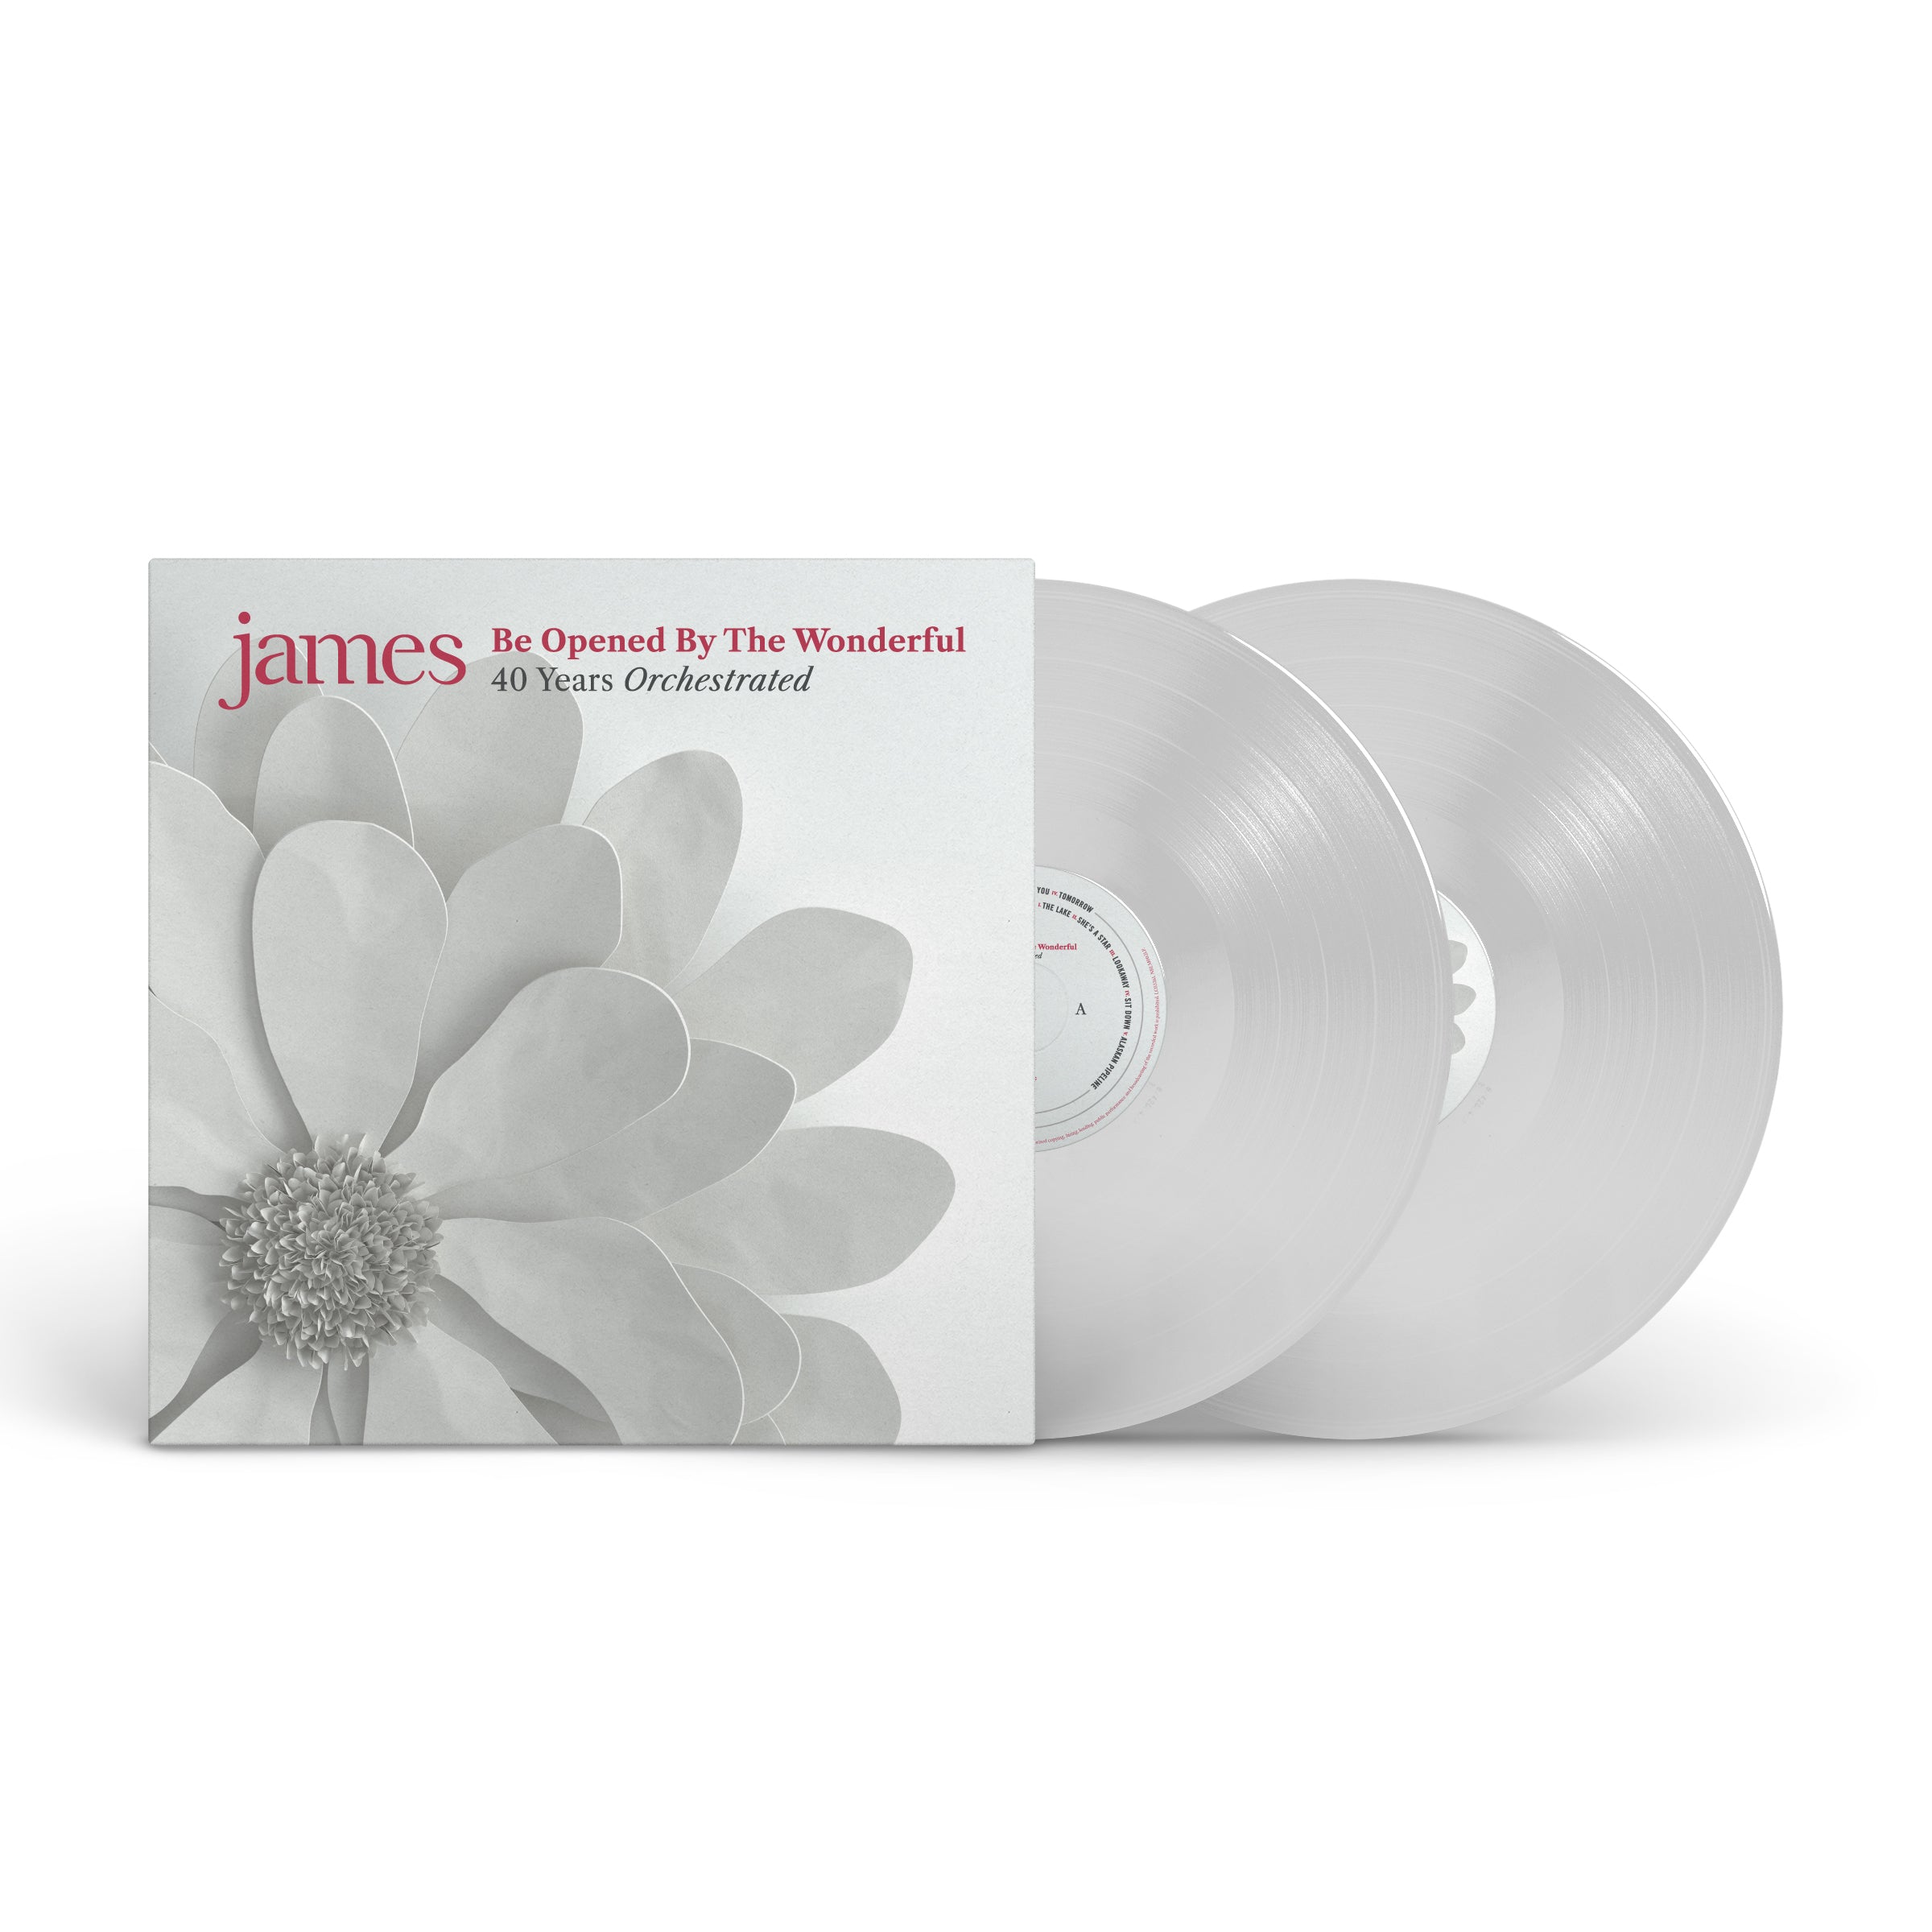 James - Be Opened By The Wonderful: White Vinyl 2LP